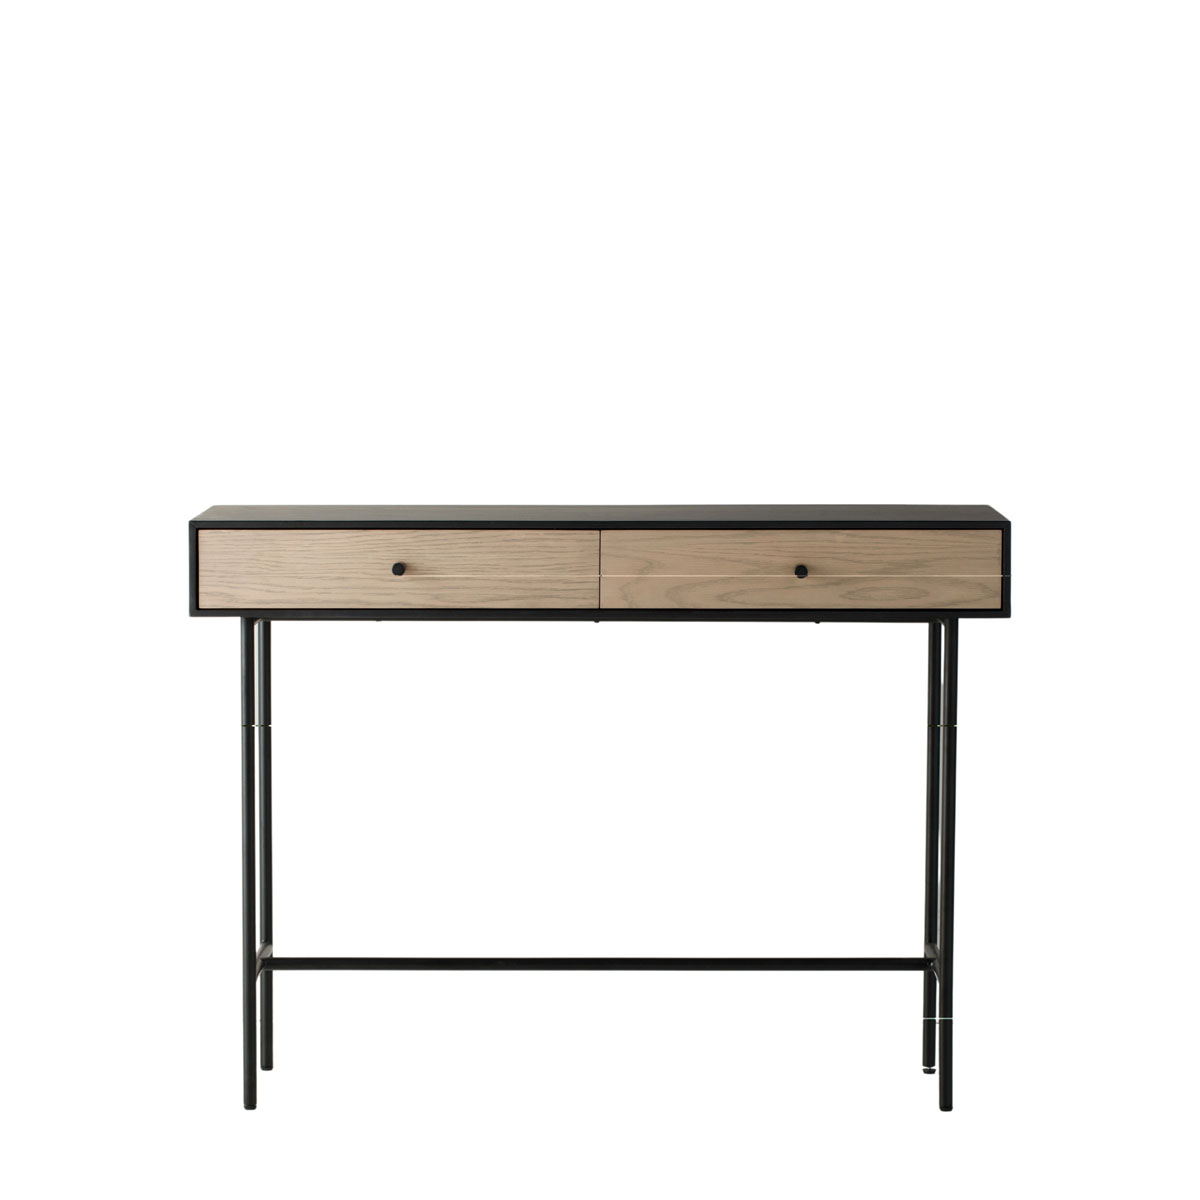 Carbury 2 Drawer Console Table 1100x350x800mm